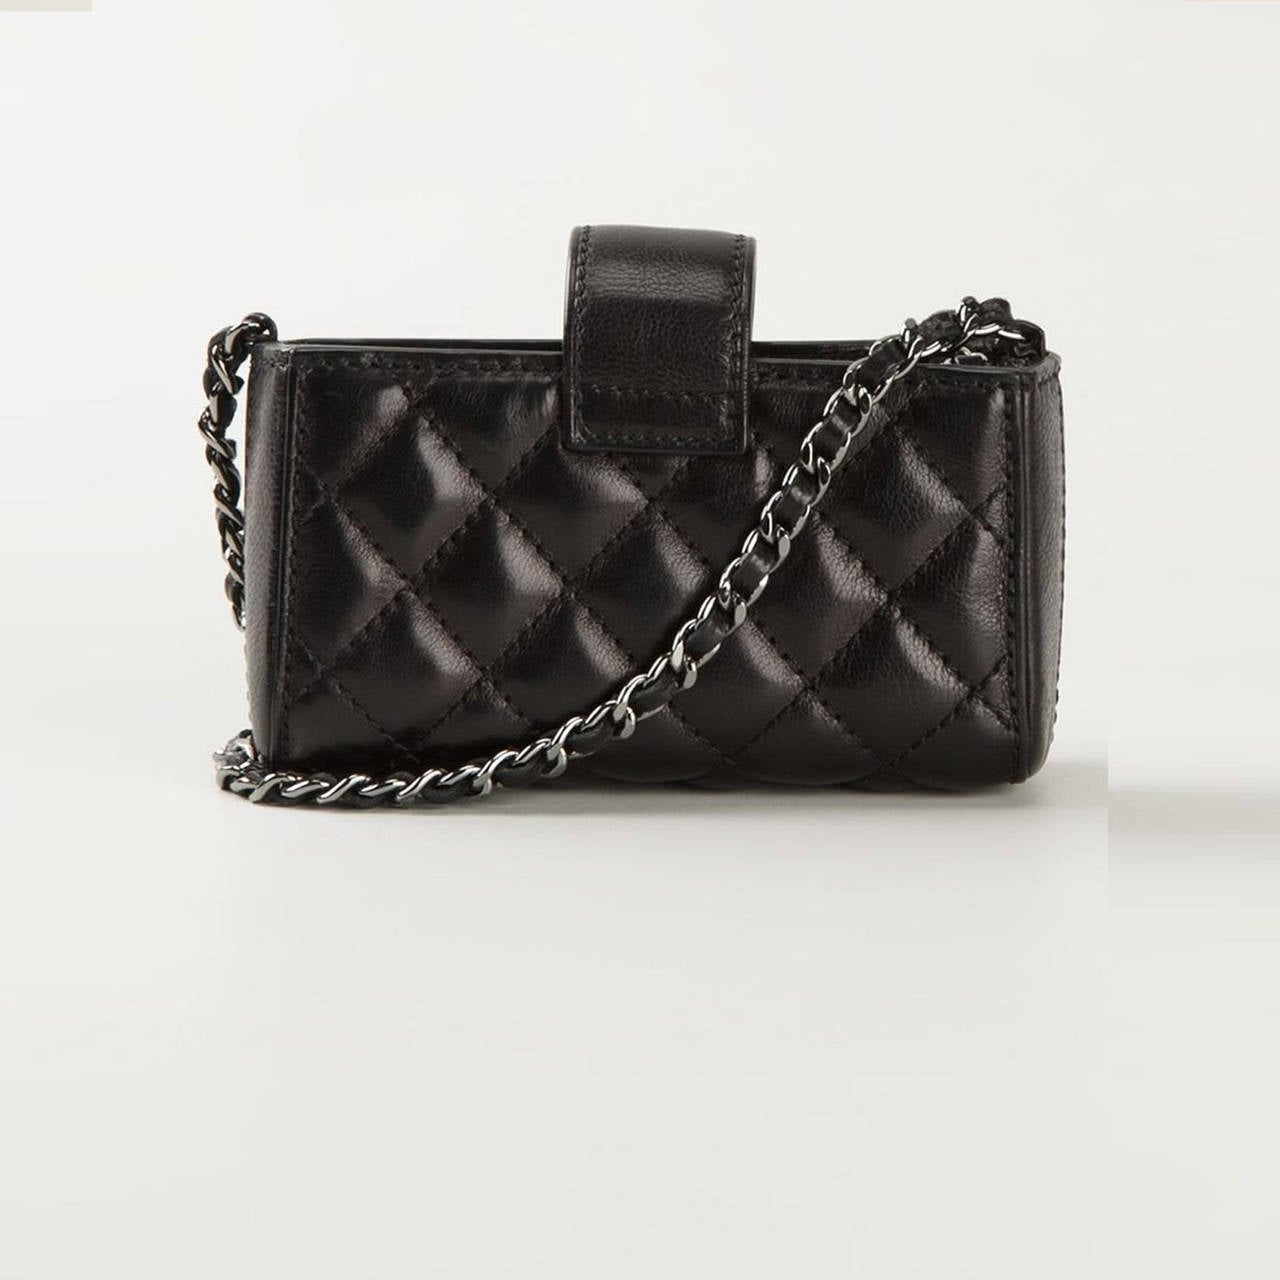 This small leather clutch from Chanel features a foldover top with snap closure, a quilted effect, a chain and leather strap, a logo to the outside, and interior zipped compartment and an internal logo stamp.

Measurements: height: 6 cm, width: 13